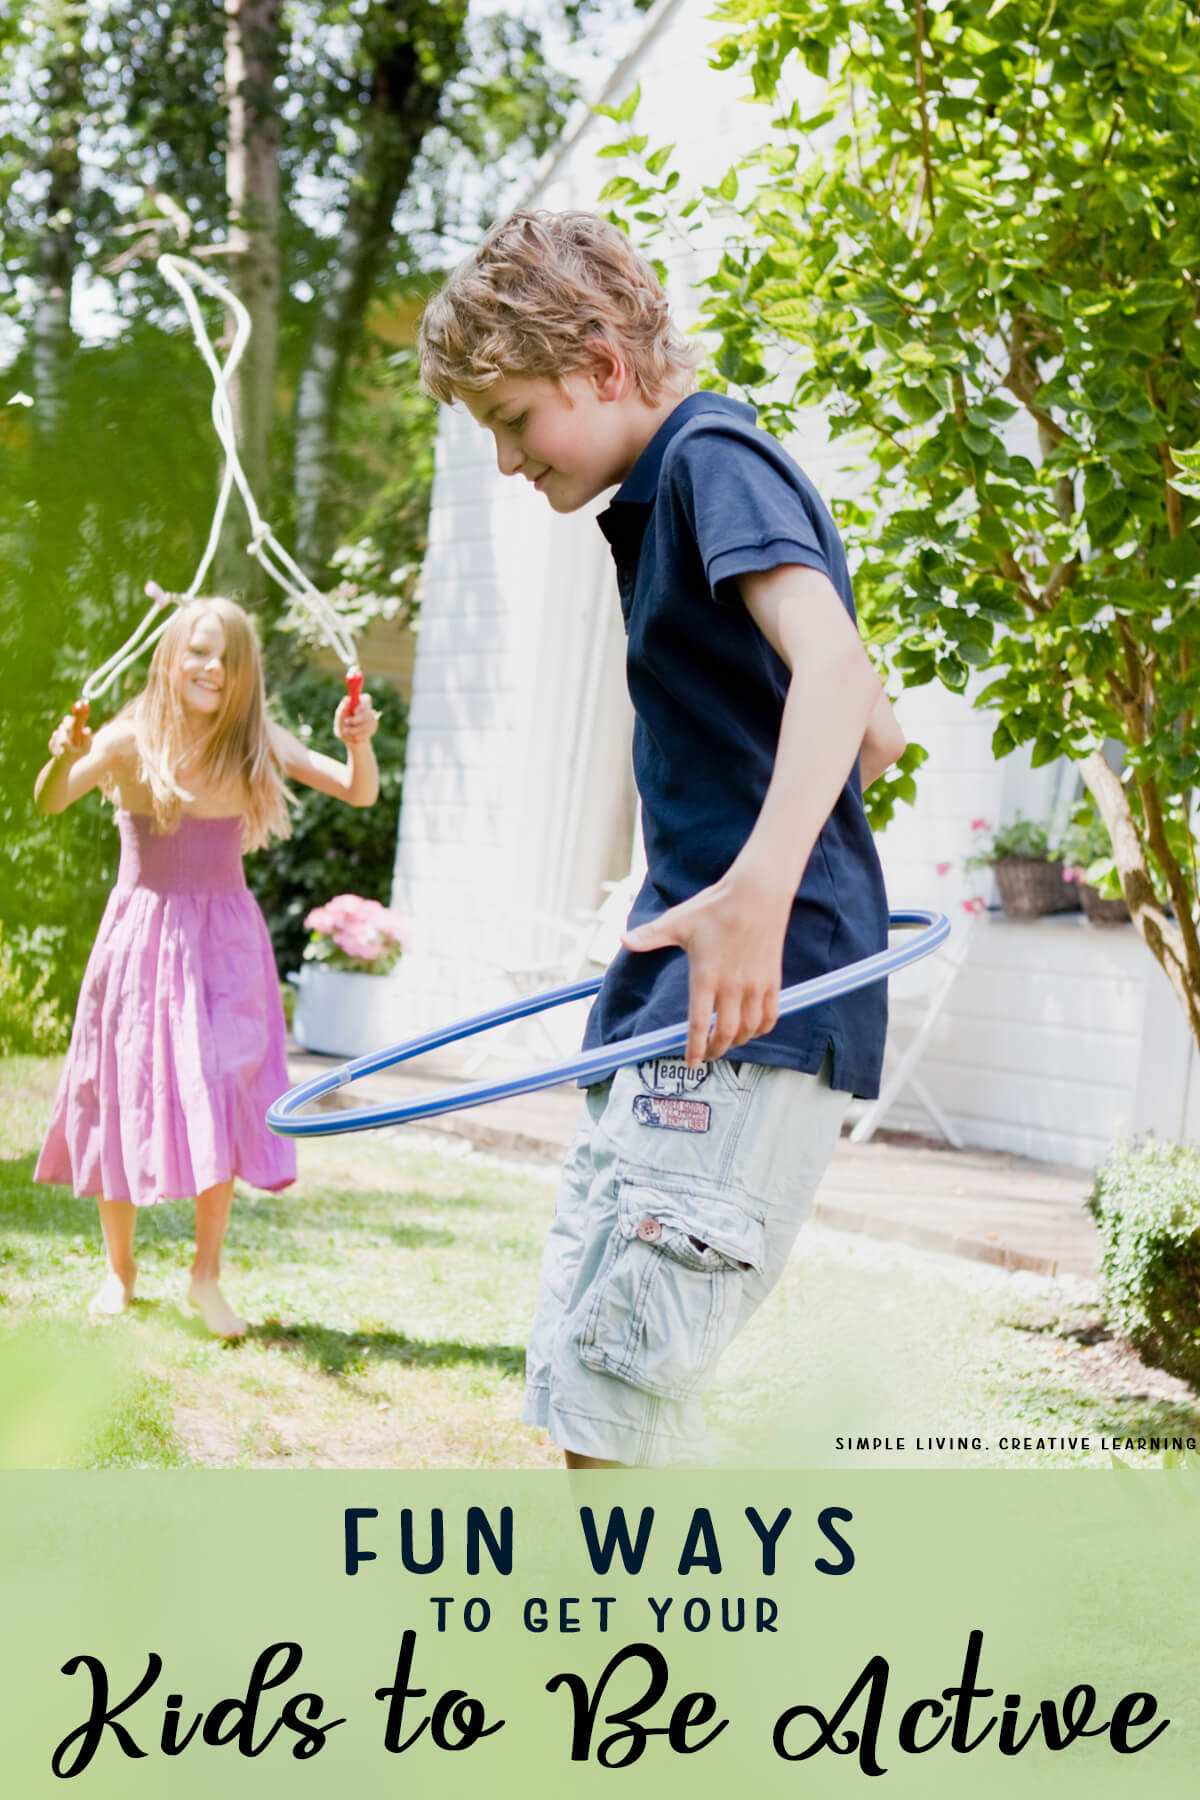 Fun Ways to Get your Kids to Be Active - boy with hula hoop and girl with skipping rope